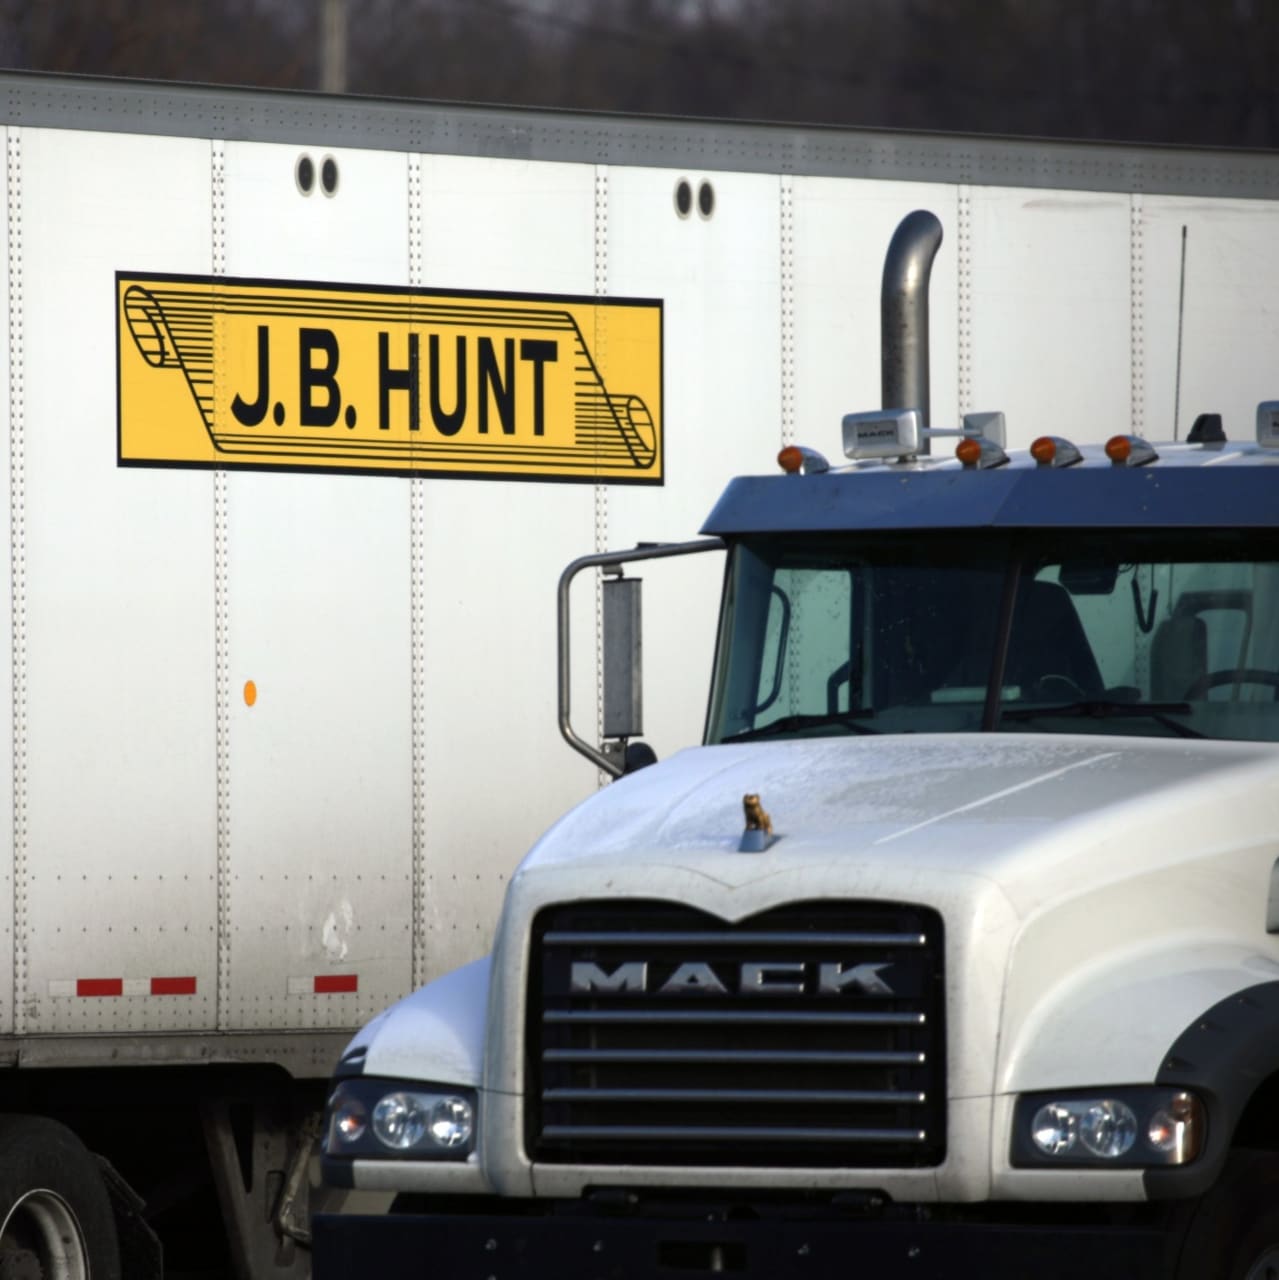 Stock of trucking company J.B. Hunt rises after Q1 earnings beat -  MarketWatch